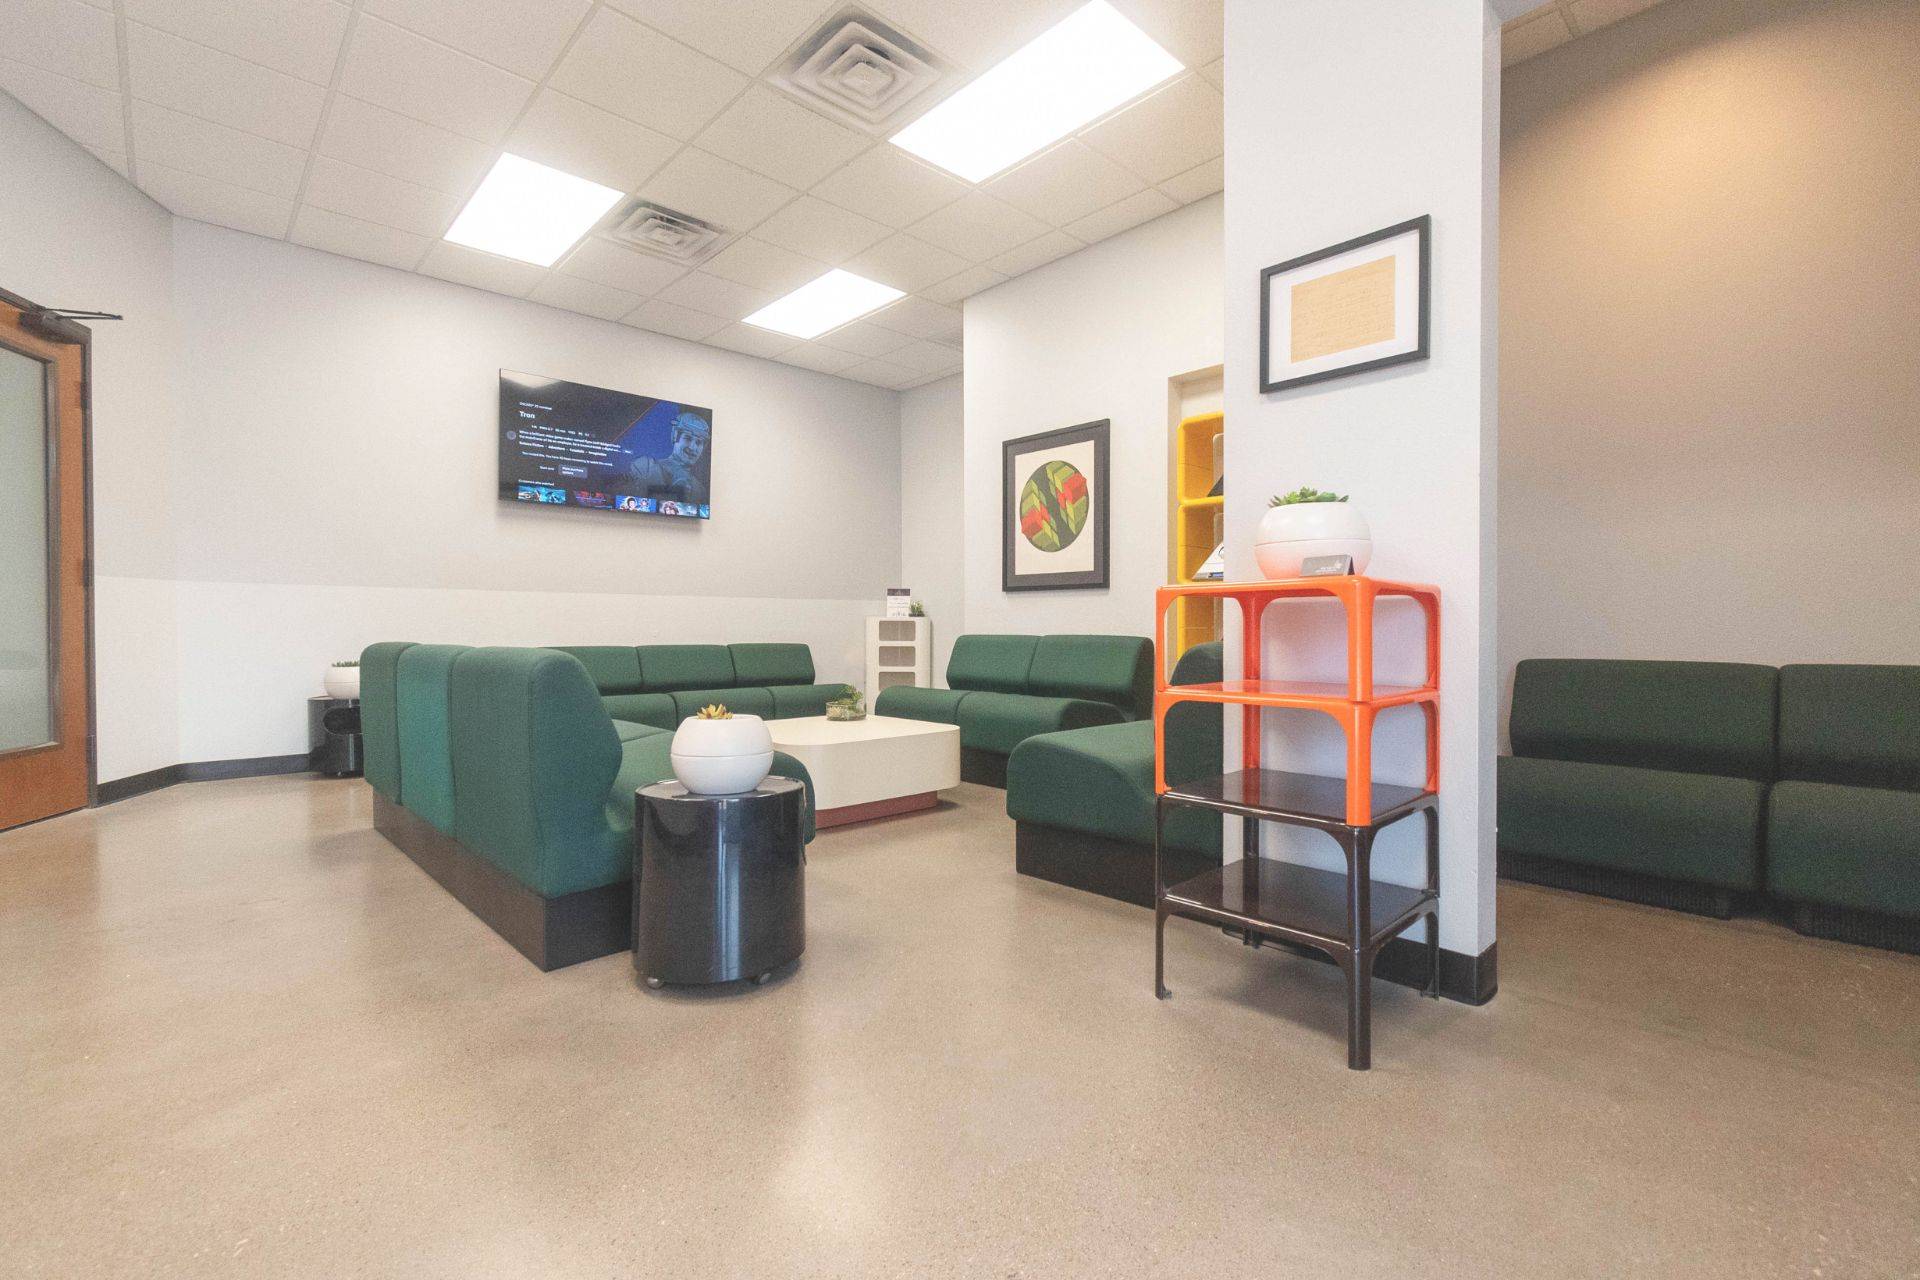 Another view of our dental office in Dallas's waiting room.